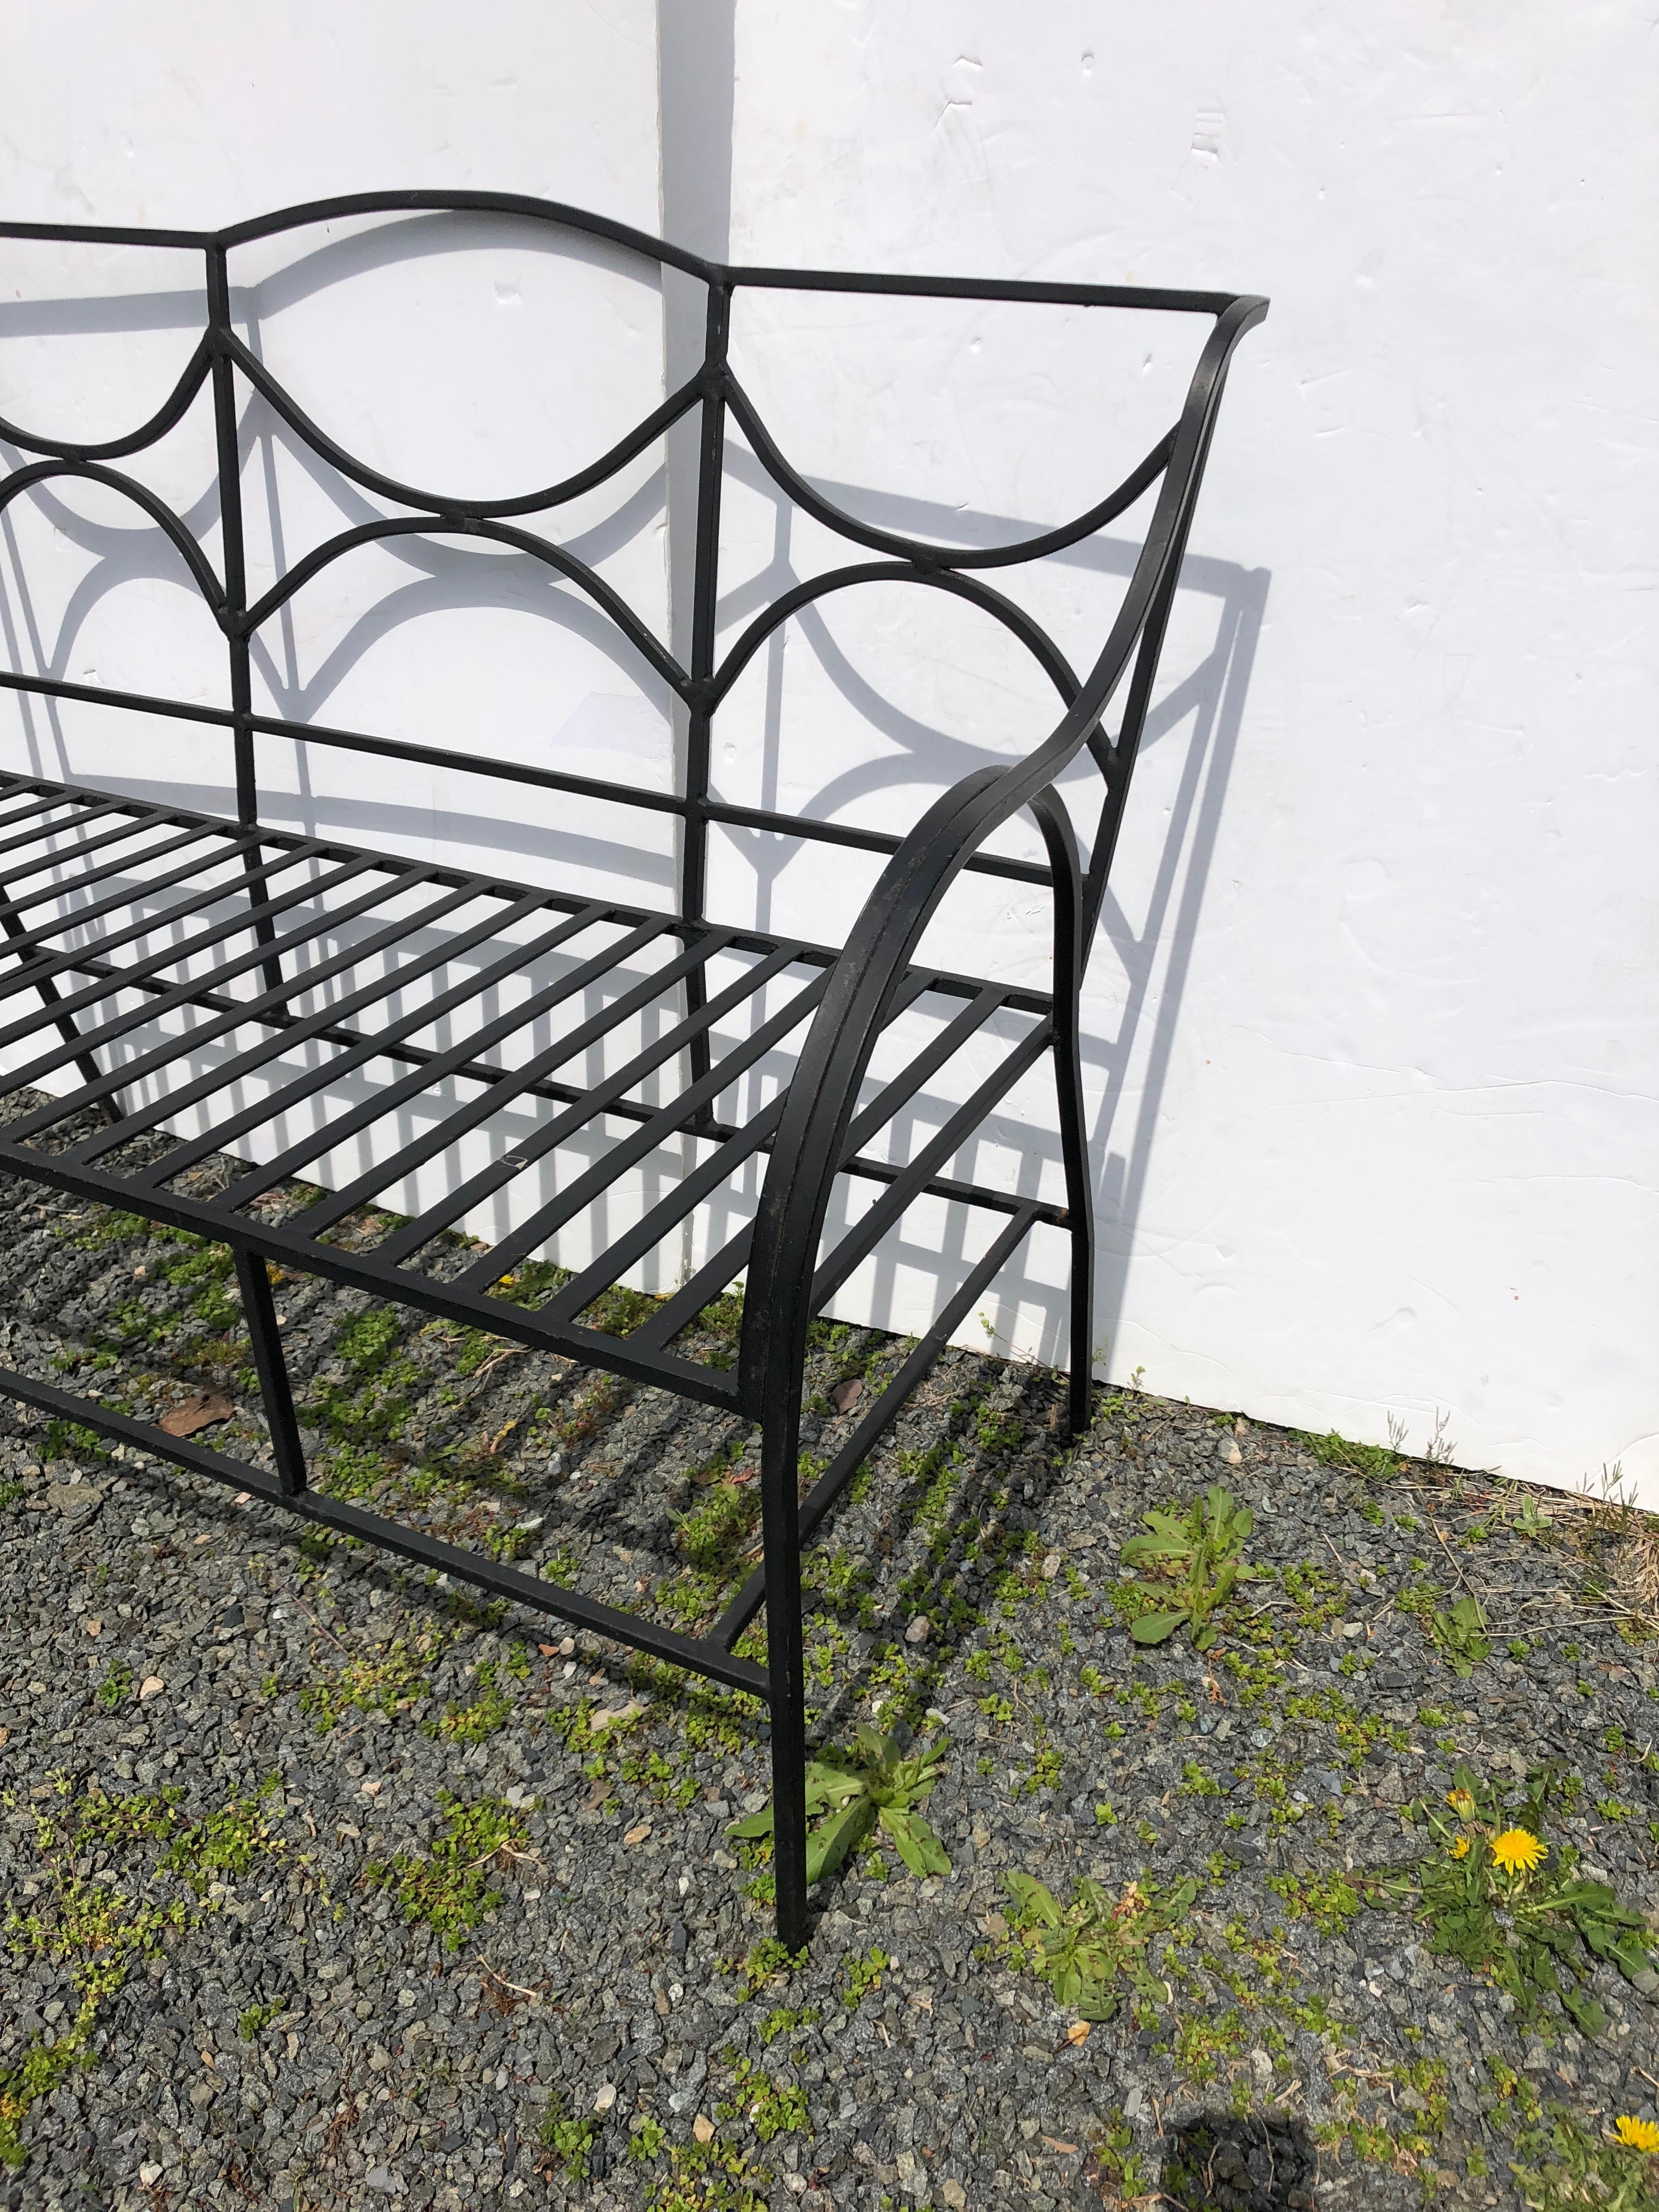 A beautiful sleek but very sturdy well made satin black wrought iron loveseat or bench for the garden or patio, having clean Directorie or Neoclassical lines. No cushion included.
Measures: Seat depth 19
Arm height 25.